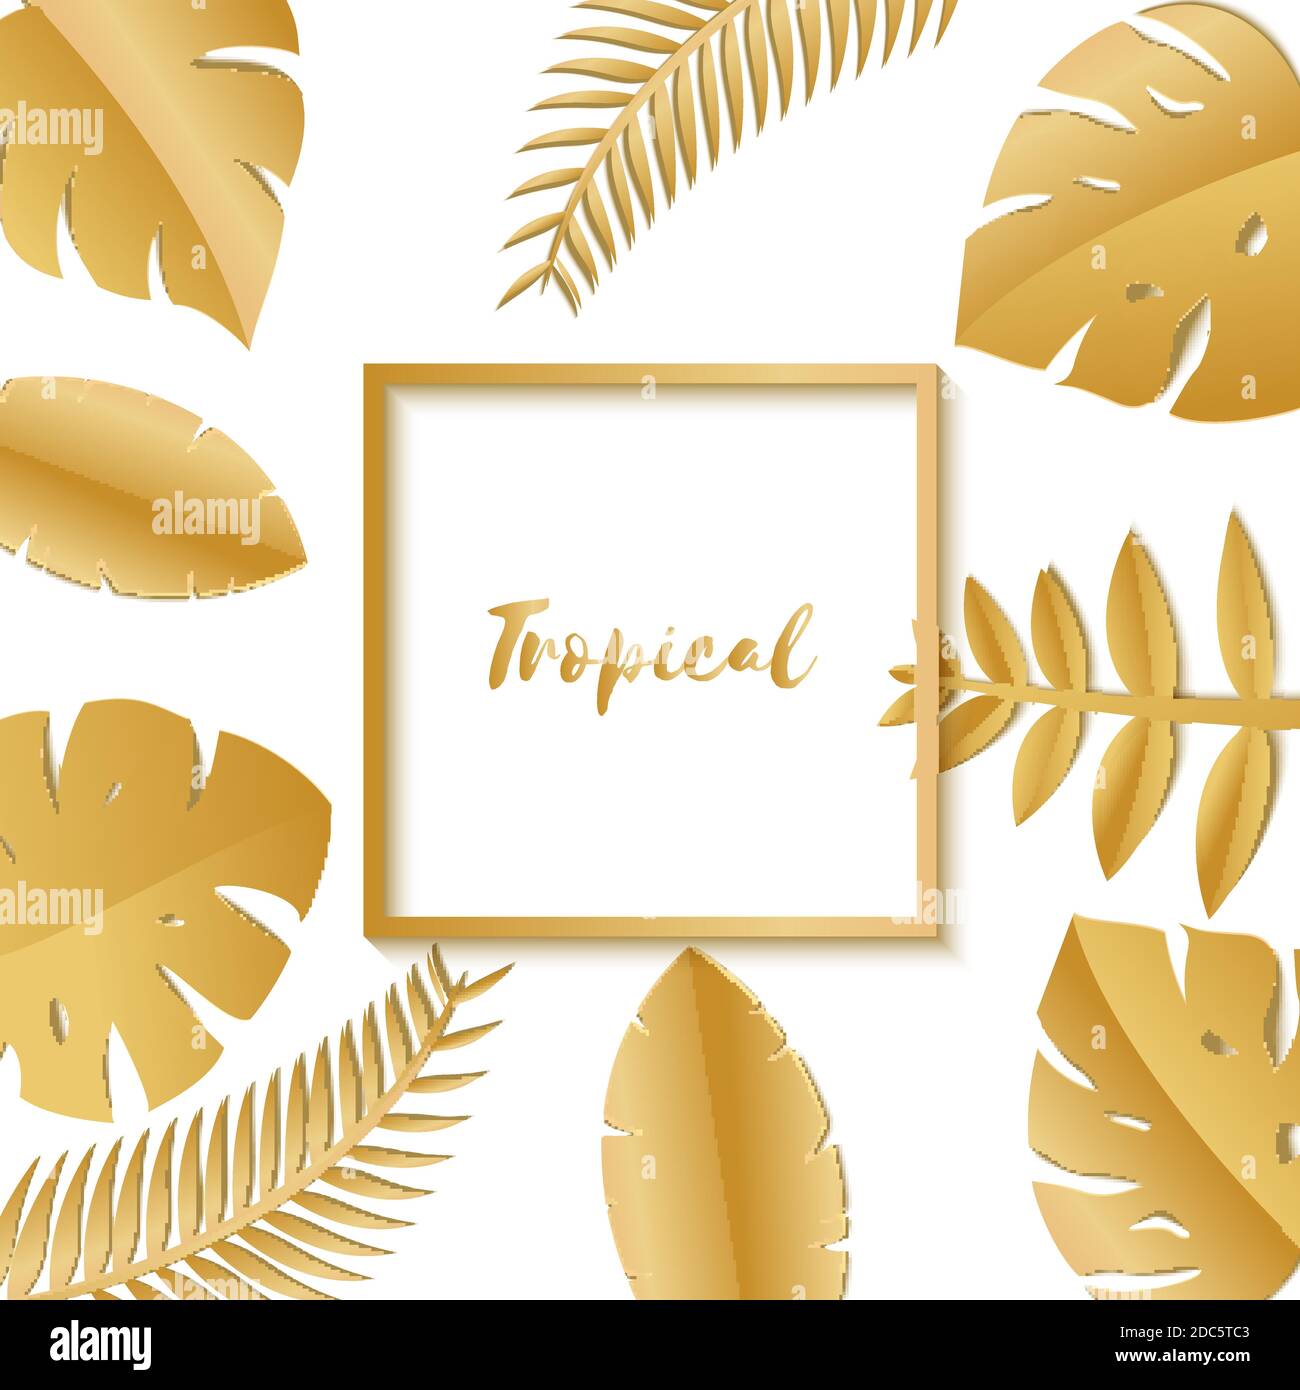 Gold leaves Cut Out Stock Images & Pictures - Alamy